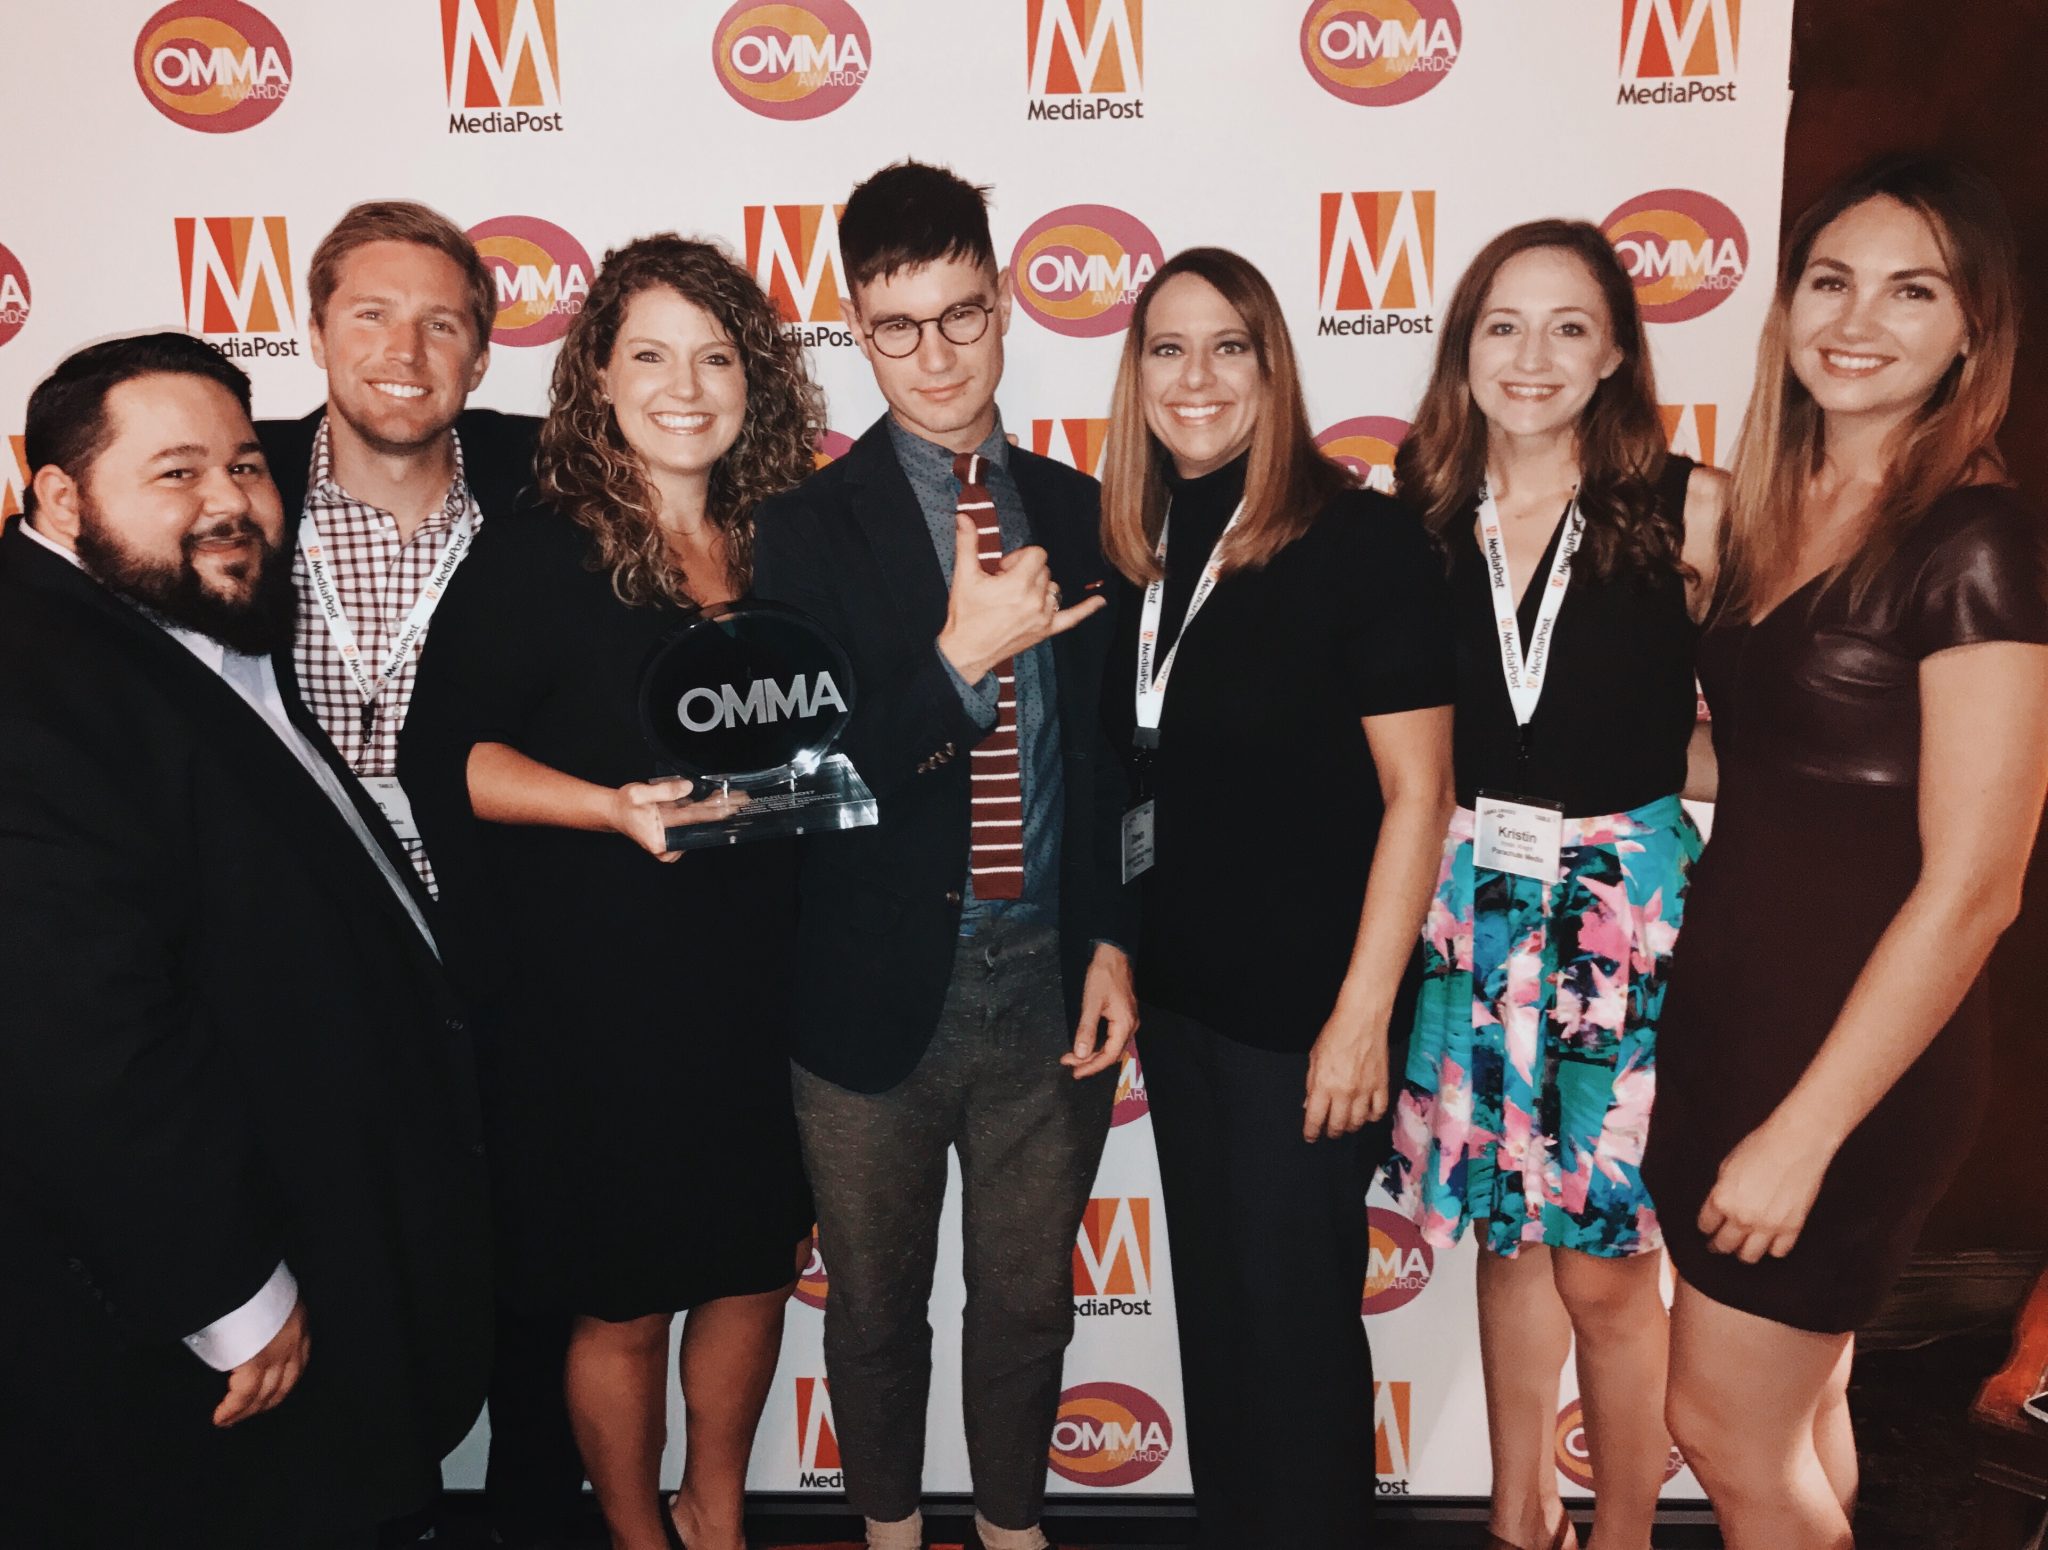 The UMG Nashville team at the 2017 OMMAs.